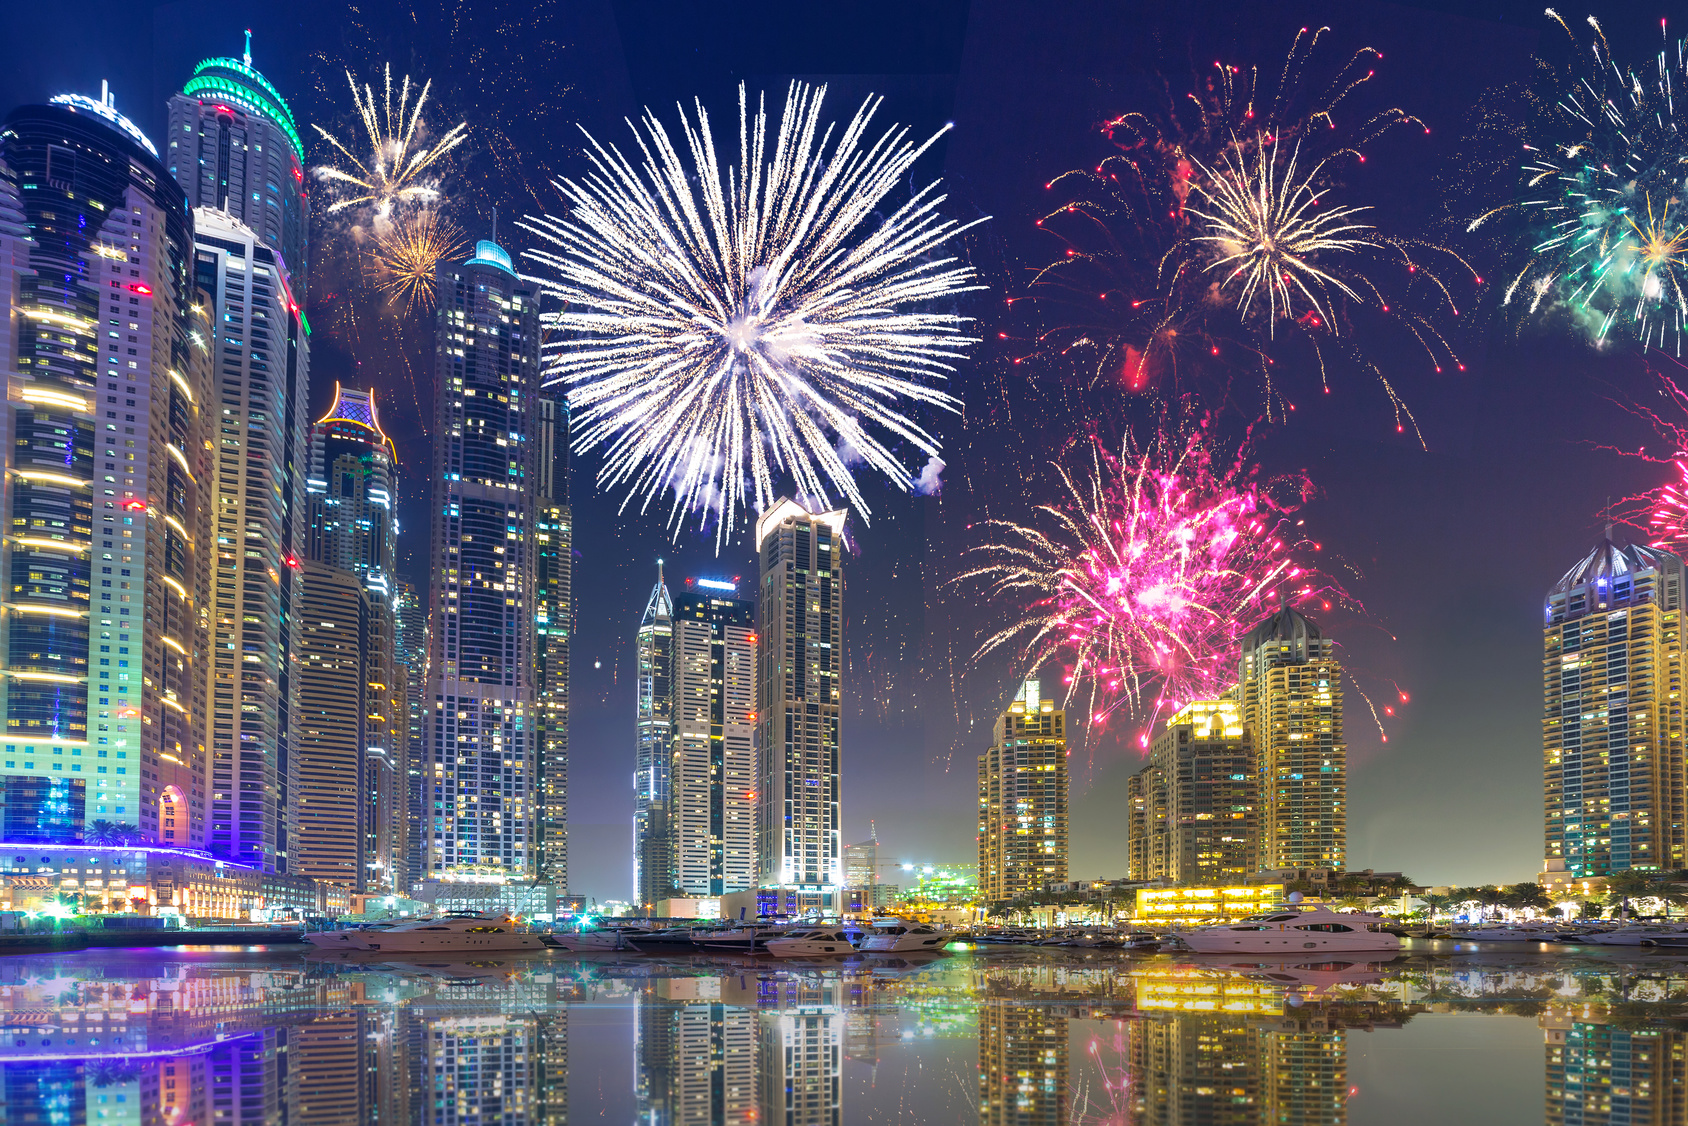 Dubai on New Year’s Eve - Best Places to Watch the Fireworks This Year